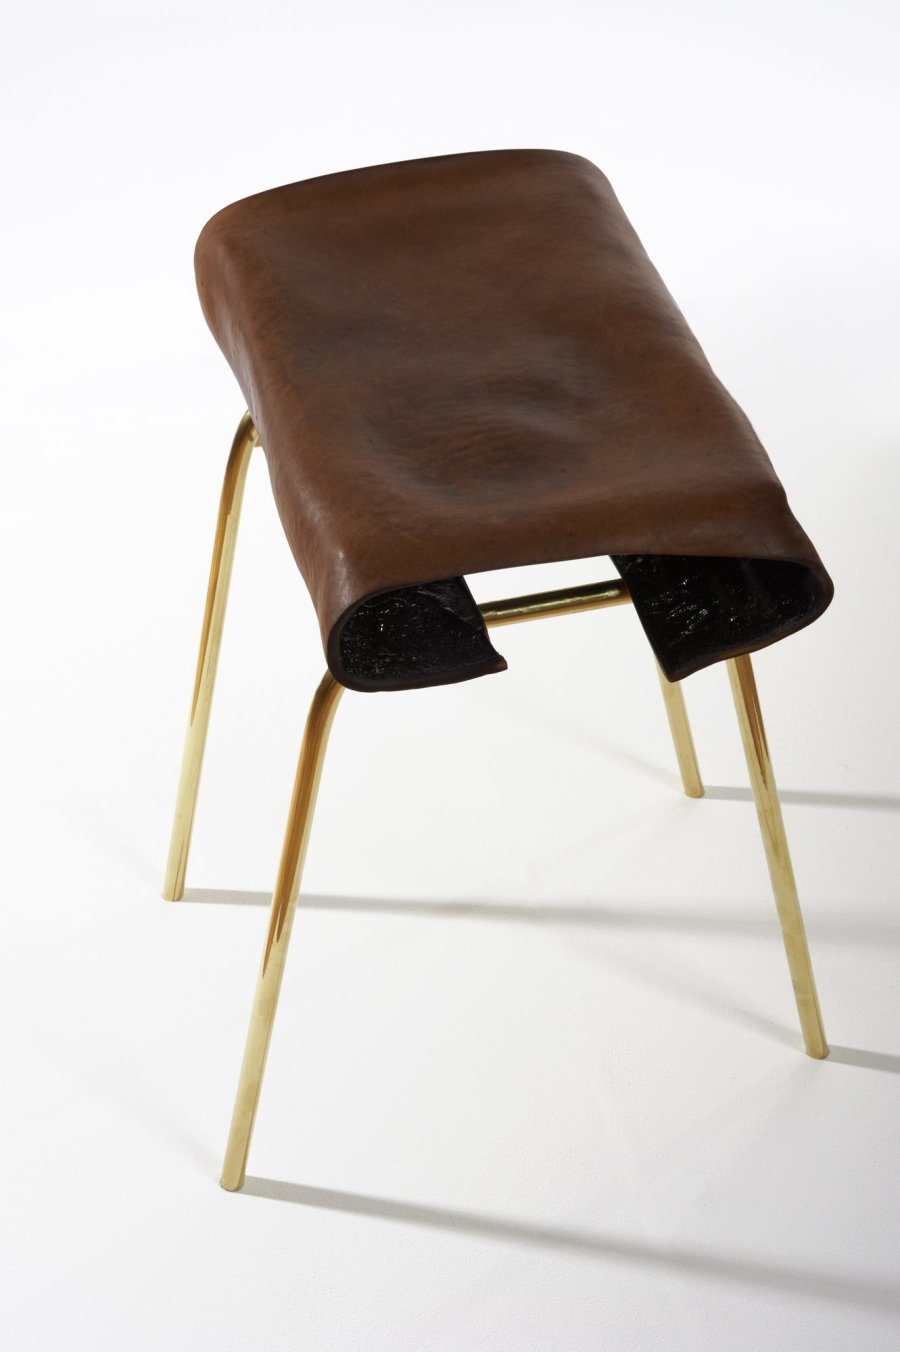 <p><strong>Simon Hasan</strong>, Geno Stool, 2011</p><p>Leather, brass</p><p>37.5 W x 25 D x 50 H cms</p><p>Edition of 24 plus 2 Artist's Proofs</p><p>Photography by Gideon Hart</p>